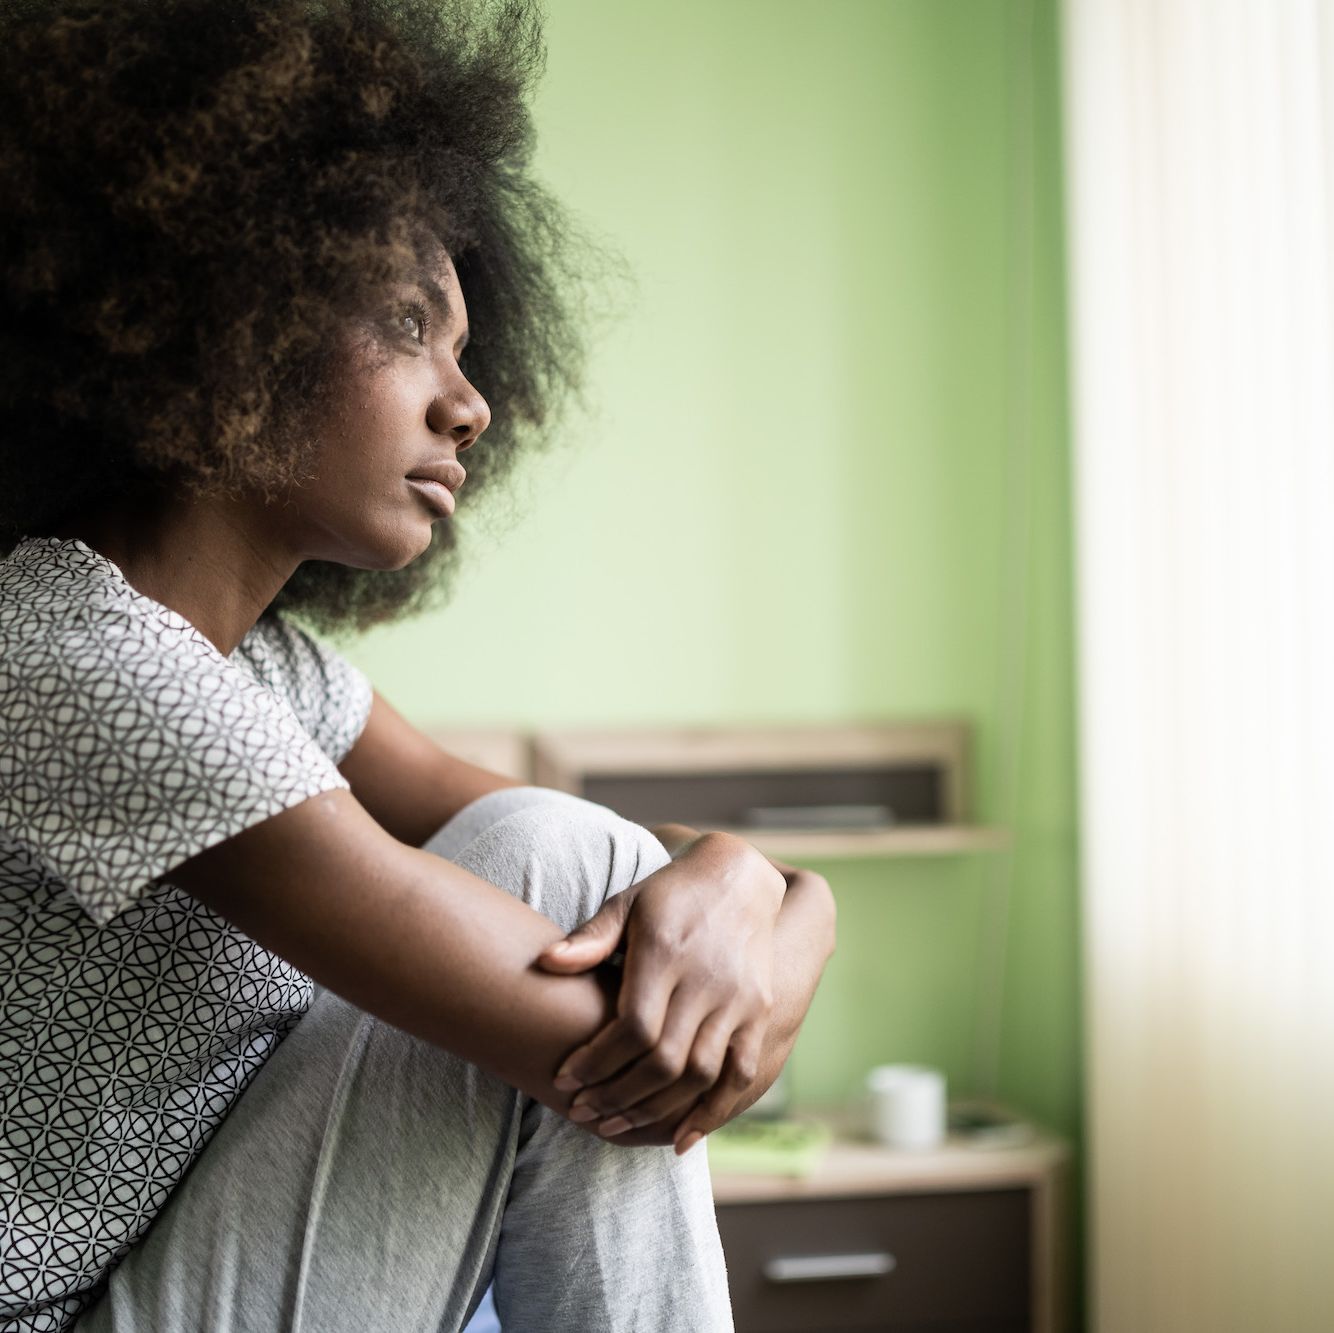 Miscarriage rates over 40% higher in black women, study suggests